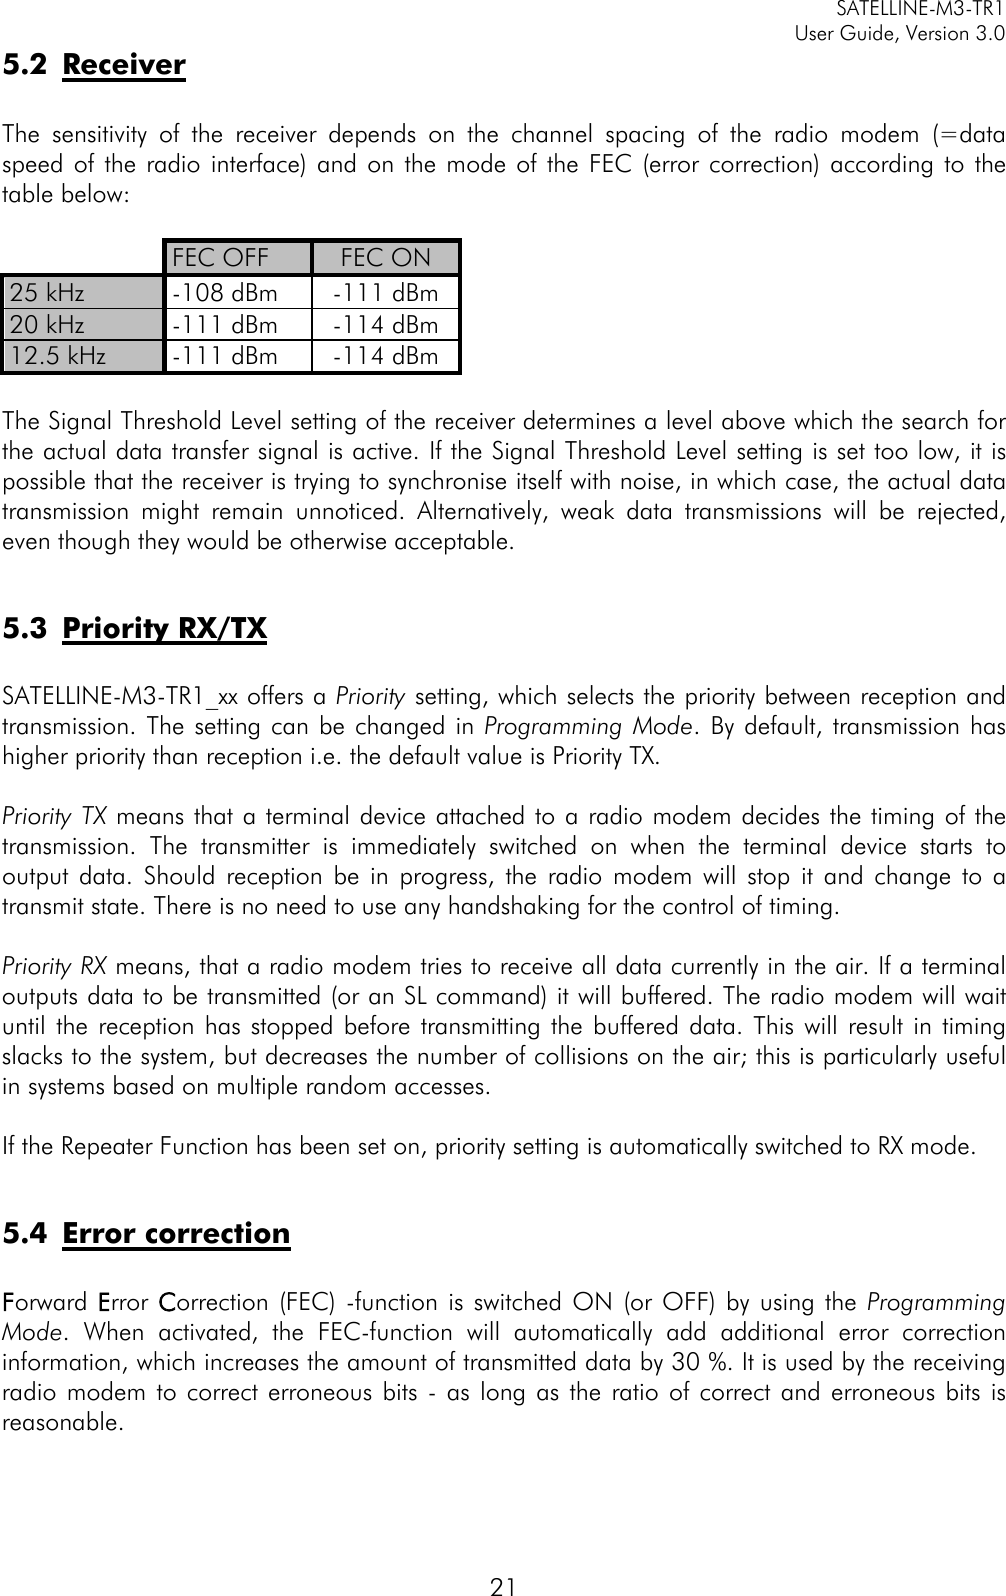     SATELLINE-M3-TR1     User Guide, Version 3.0  21 5.2 Receiver  The sensitivity of the receiver depends on the channel spacing of the radio modem (=data speed of the radio interface) and on the mode of the FEC (error correction) according to the table below:   FEC OFF FEC ON 25 kHz -108 dBm -111 dBm 20 kHz -111 dBm -114 dBm 12.5 kHz -111 dBm -114 dBm  The Signal Threshold Level setting of the receiver determines a level above which the search for the actual data transfer signal is active. If the Signal Threshold Level setting is set too low, it is possible that the receiver is trying to synchronise itself with noise, in which case, the actual data transmission might remain unnoticed. Alternatively, weak data transmissions will be rejected, even though they would be otherwise acceptable.   5.3 Priority RX/TX  SATELLINE-M3-TR1_xx offers a Priority setting, which selects the priority between reception and transmission. The setting can be changed in Programming Mode. By default, transmission has higher priority than reception i.e. the default value is Priority TX.    Priority TX means that a terminal device attached to a radio modem decides the timing of the transmission. The transmitter is immediately switched on when the terminal device starts to output data. Should reception be in progress, the radio modem will stop it and change to a transmit state. There is no need to use any handshaking for the control of timing.   Priority RX means, that a radio modem tries to receive all data currently in the air. If a terminal outputs data to be transmitted (or an SL command) it will buffered. The radio modem will wait until the reception has stopped before transmitting the buffered data. This will result in timing slacks to the system, but decreases the number of collisions on the air; this is particularly useful in systems based on multiple random accesses.  If the Repeater Function has been set on, priority setting is automatically switched to RX mode.  5.4 Error correction  Forward Error Correction (FEC)  -function is switched ON (or OFF) by using the Programming Mode. When activated, the FEC-function will automatically add additional error correction information, which increases the amount of transmitted data by 30 %. It is used by the receiving radio modem to correct erroneous bits - as long as the ratio of correct and erroneous bits is reasonable.   